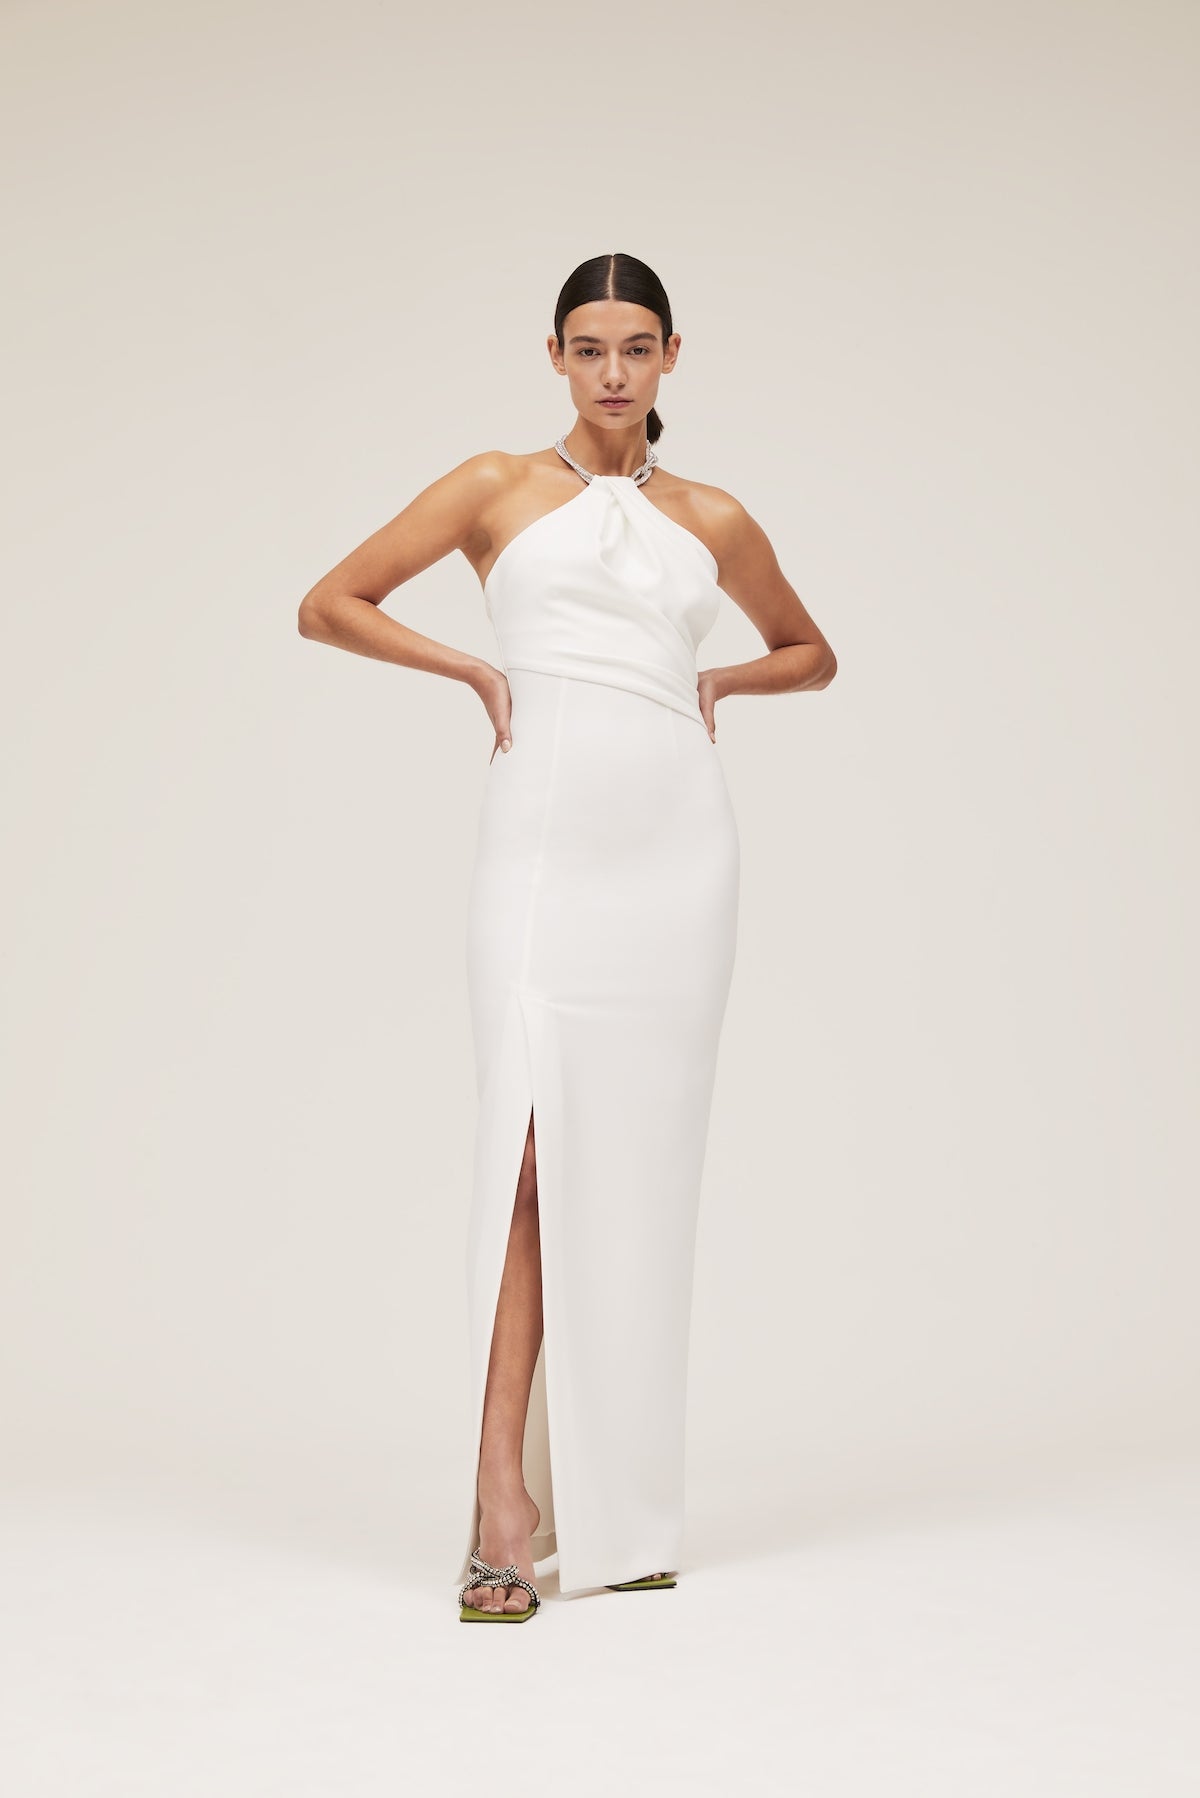 The Danette Dress in Cream – Solace London